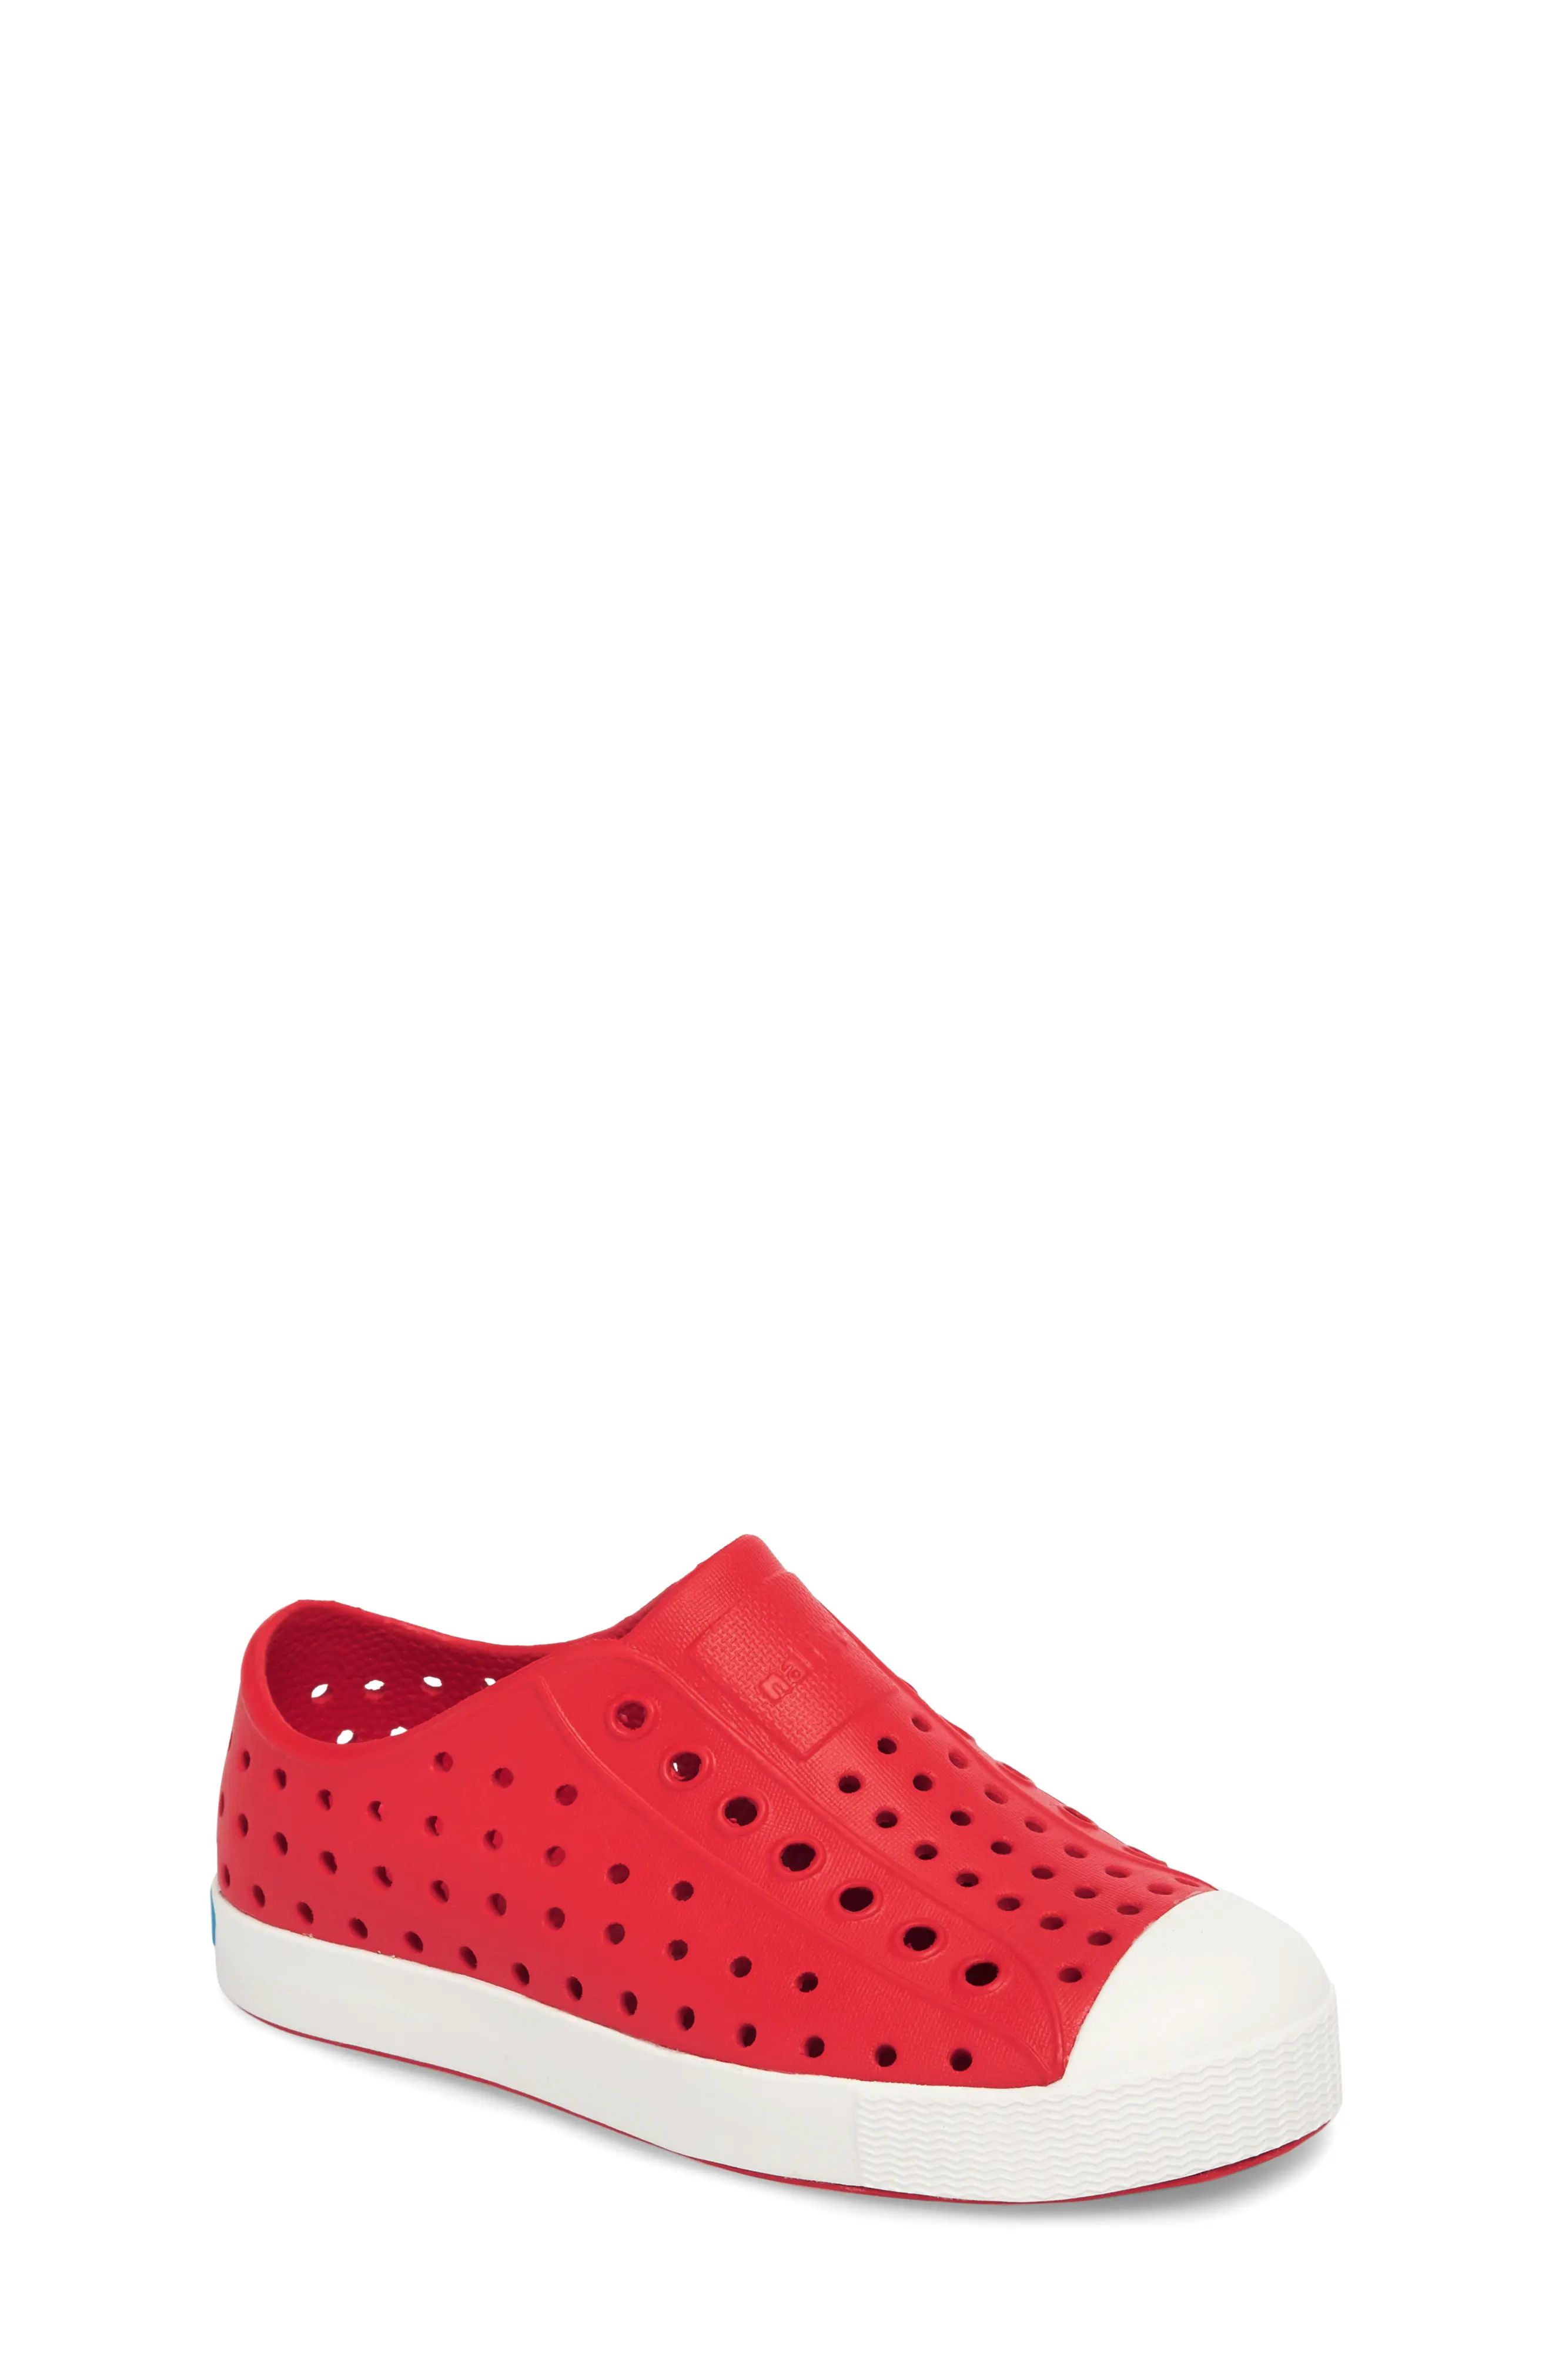 Native Shoes Jefferson Water Friendly Slip-On Vegan Sneaker in Torch Red/Shell White at Nordstrom... | Nordstrom